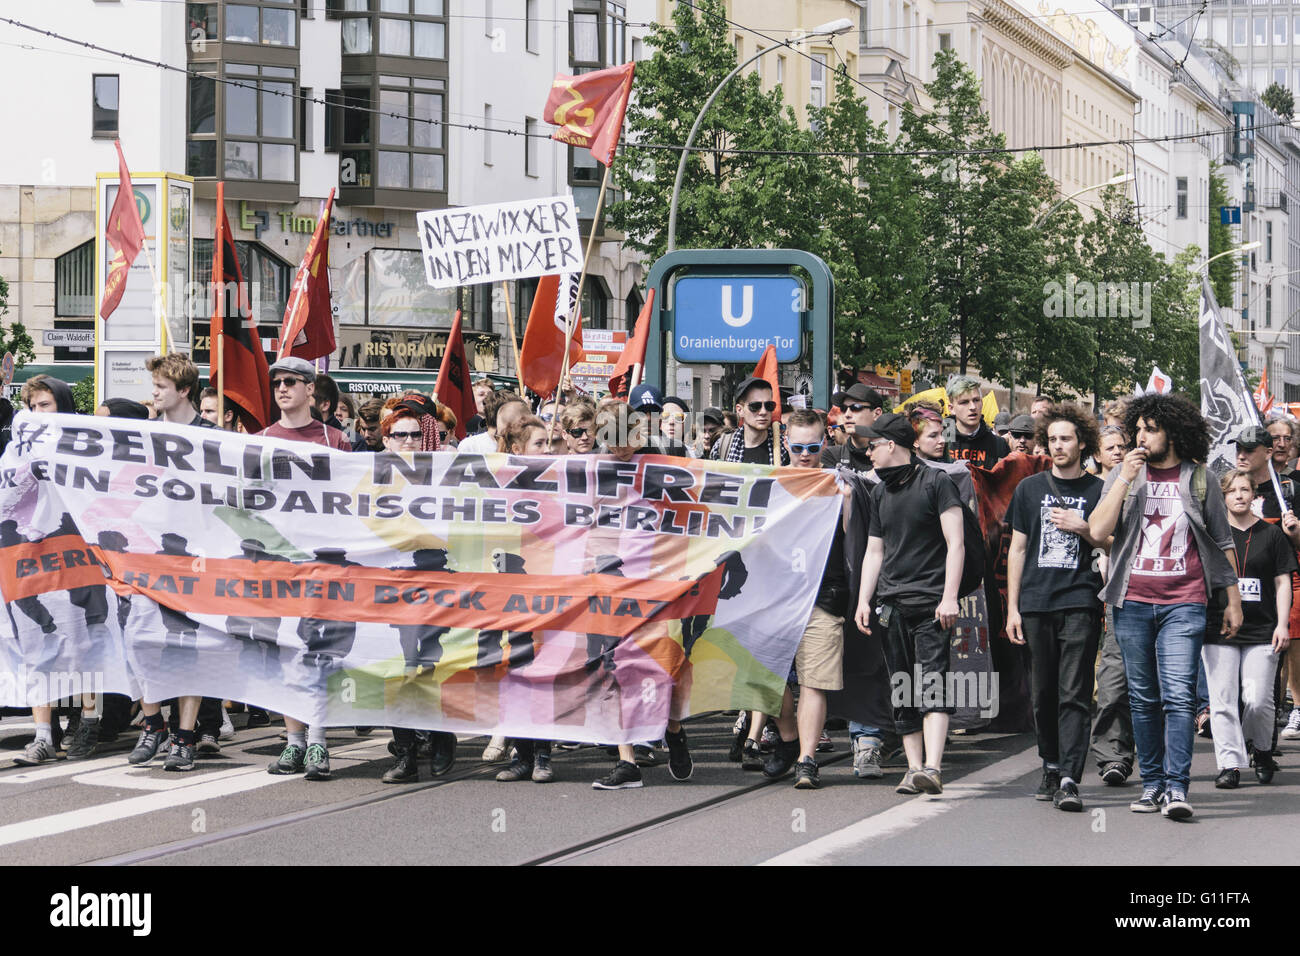 Berlin, Berlin, Germany. 7th May, 2016. Protesters during the counter protests against the rally held under the motto 'Merkel muss weg![Merkel must go]' organised by far-right group 'We for Berlin & We for Germany' Credit:  Jan Scheunert/ZUMA Wire/Alamy Live News Stock Photo